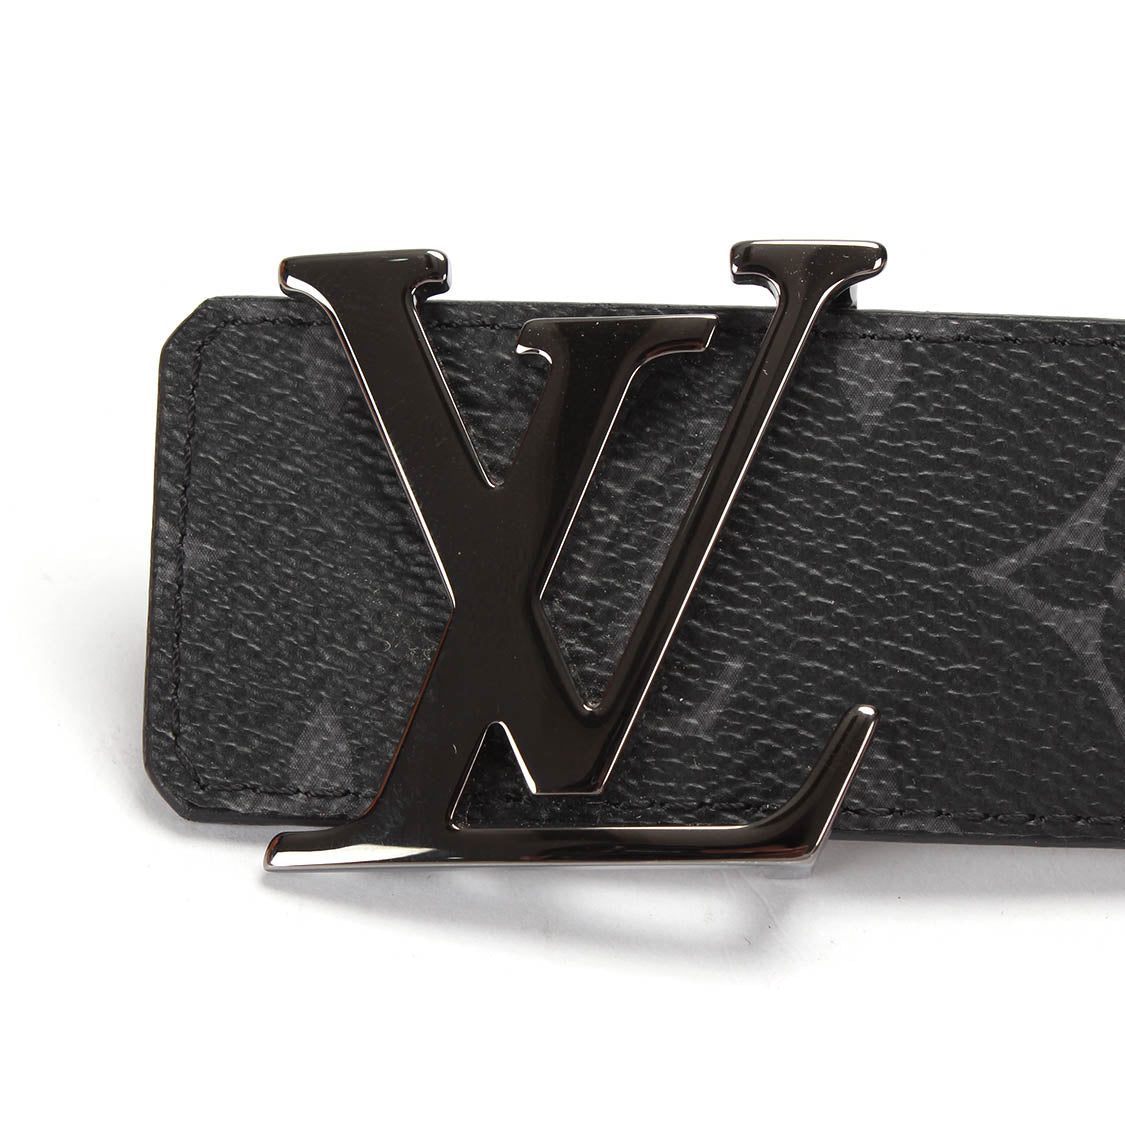 Reversible Strap Monogram Eclipse - Wallets and Small Leather